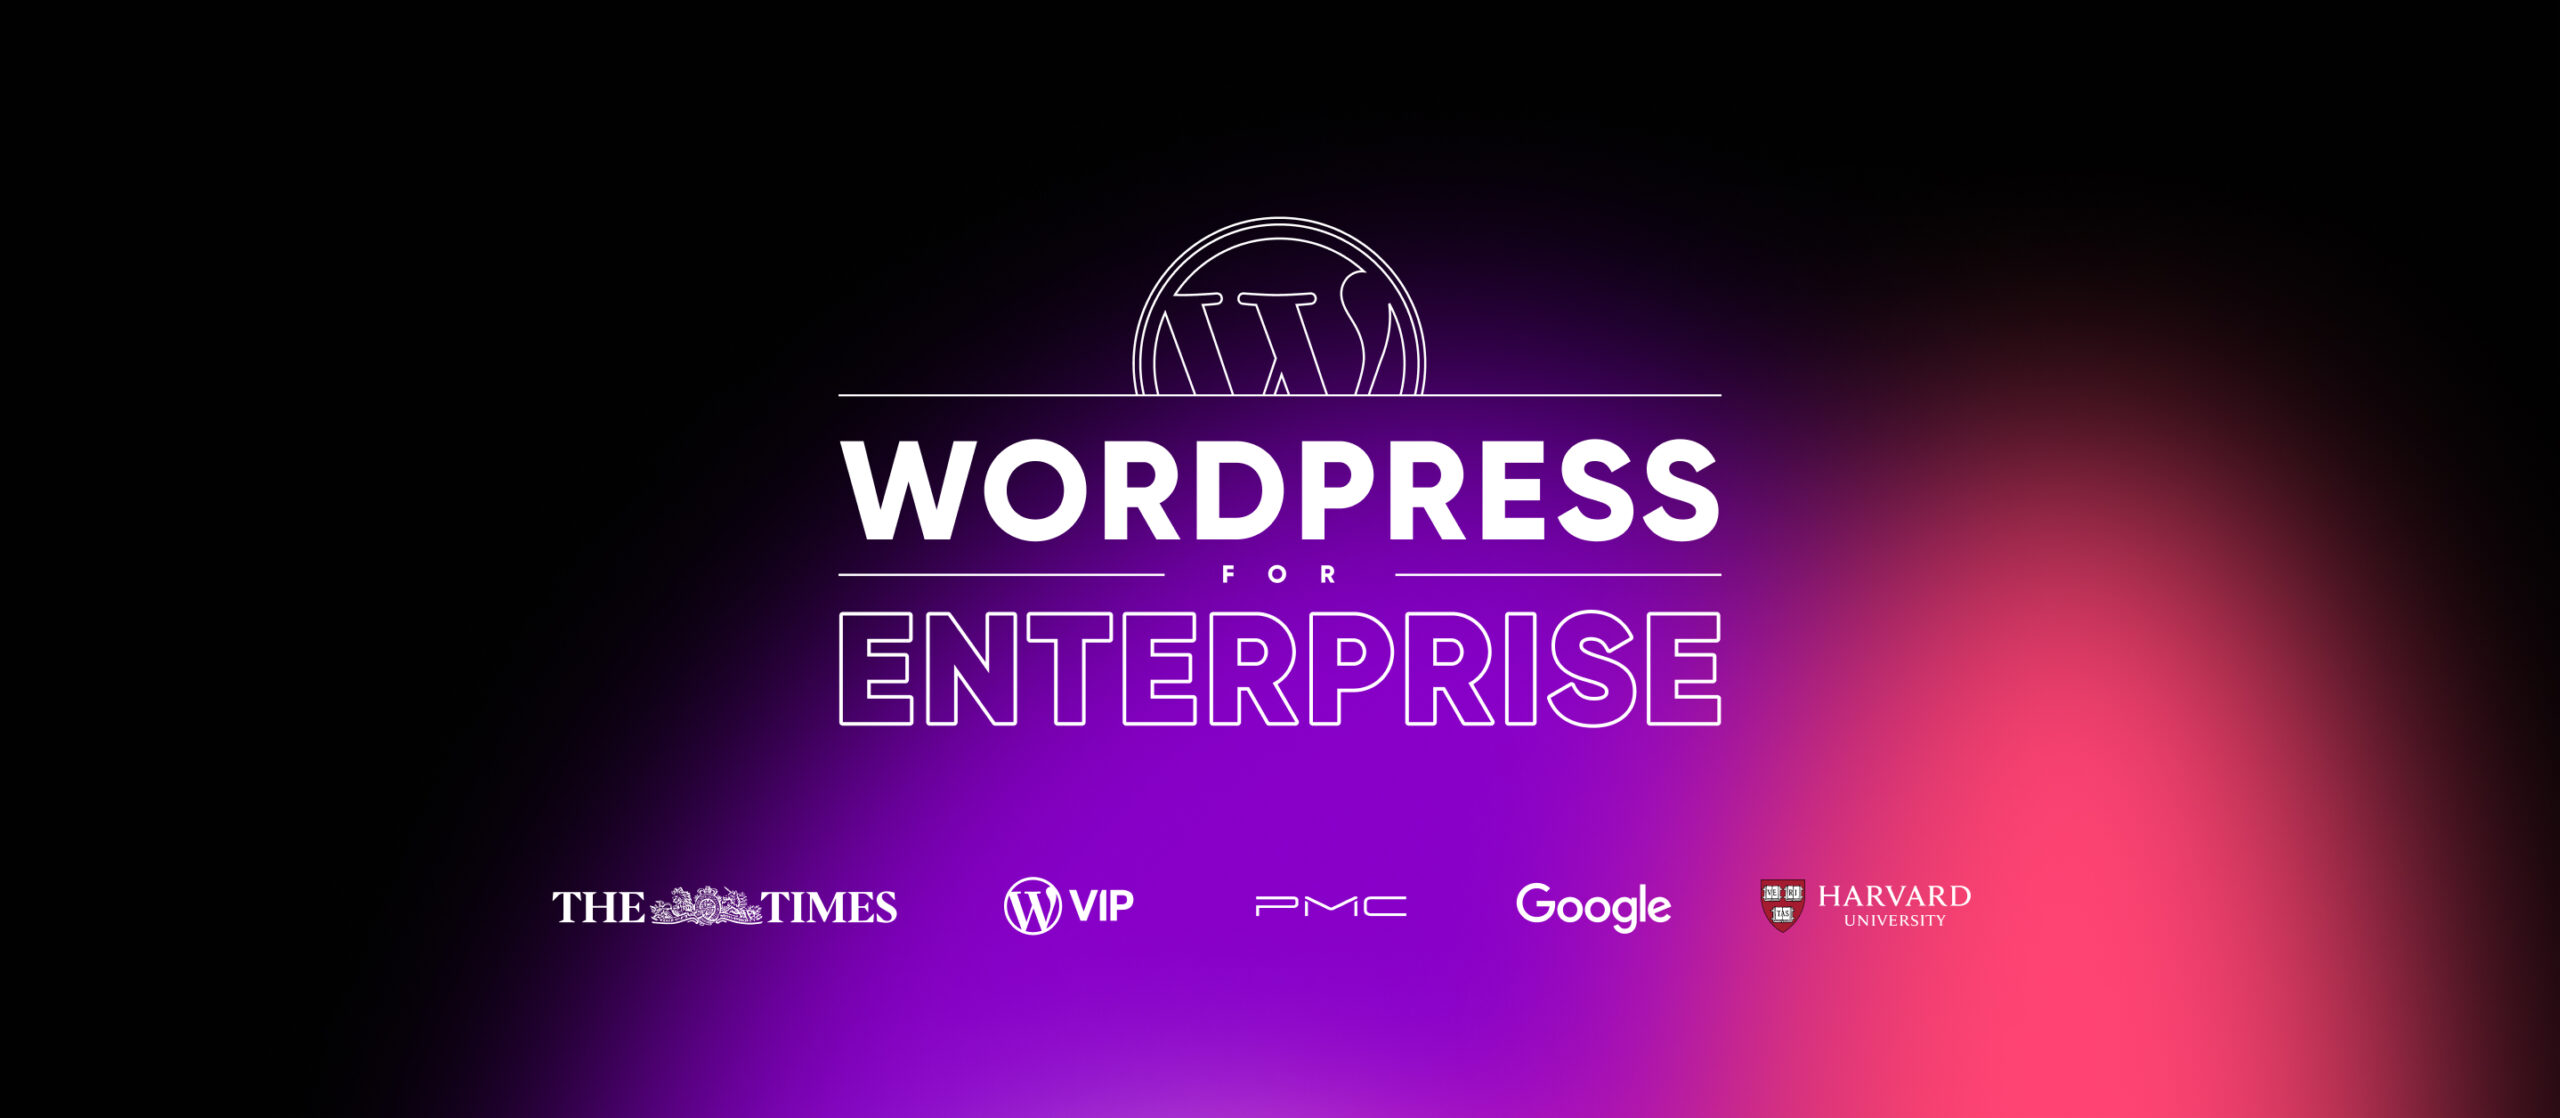 WordPress For Enterprise: Hear first-hand experiences from major brands